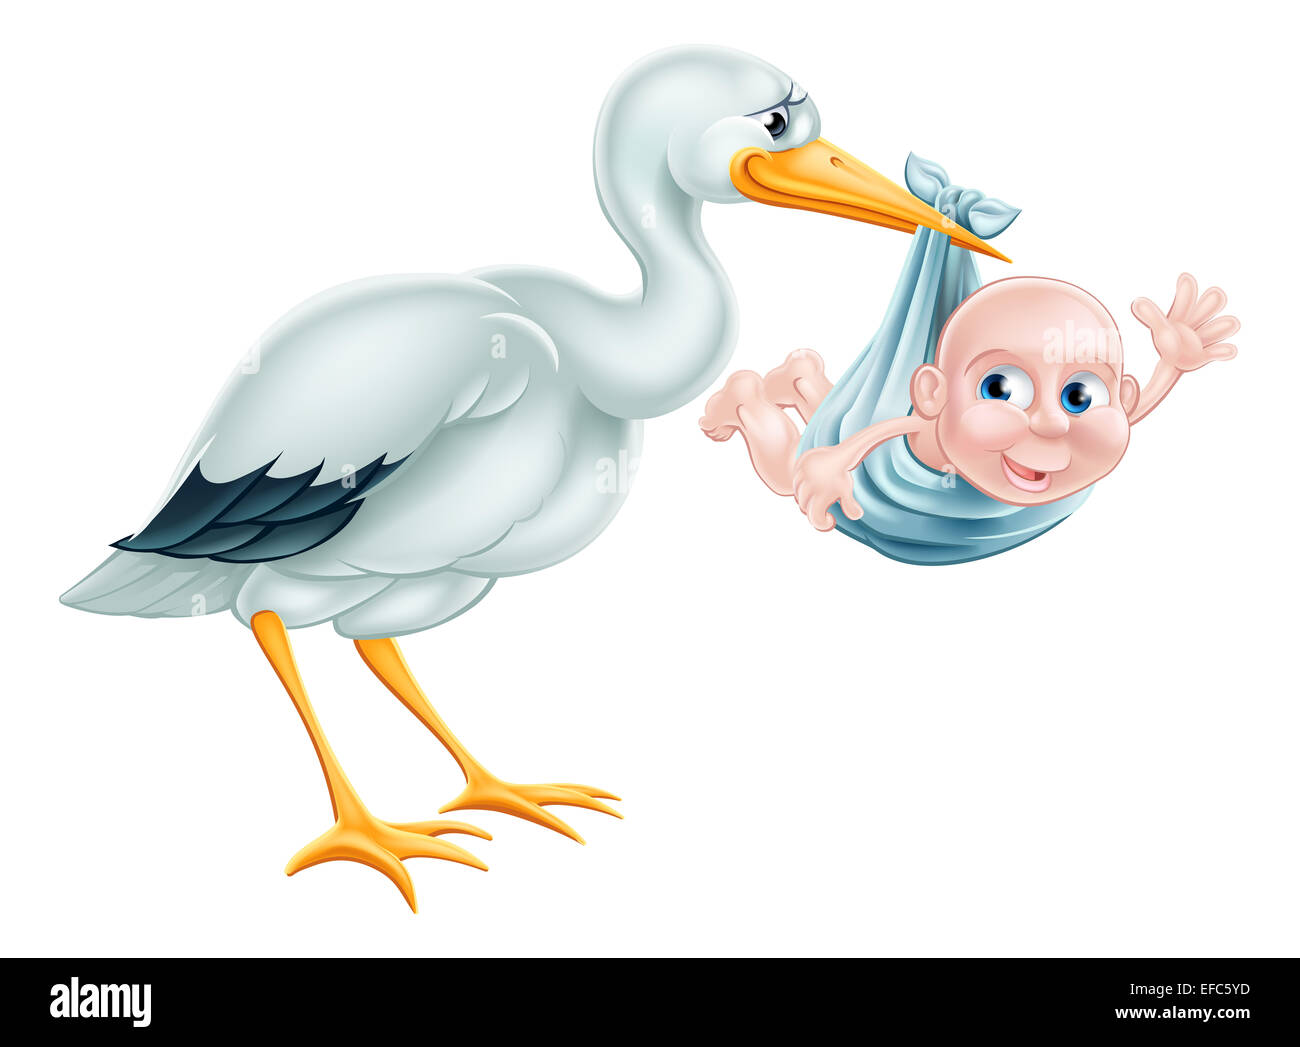 An illustration of a cartoon stork holding a newborn baby. Classic metaphor for pregnancy or child birth. Stock Photo